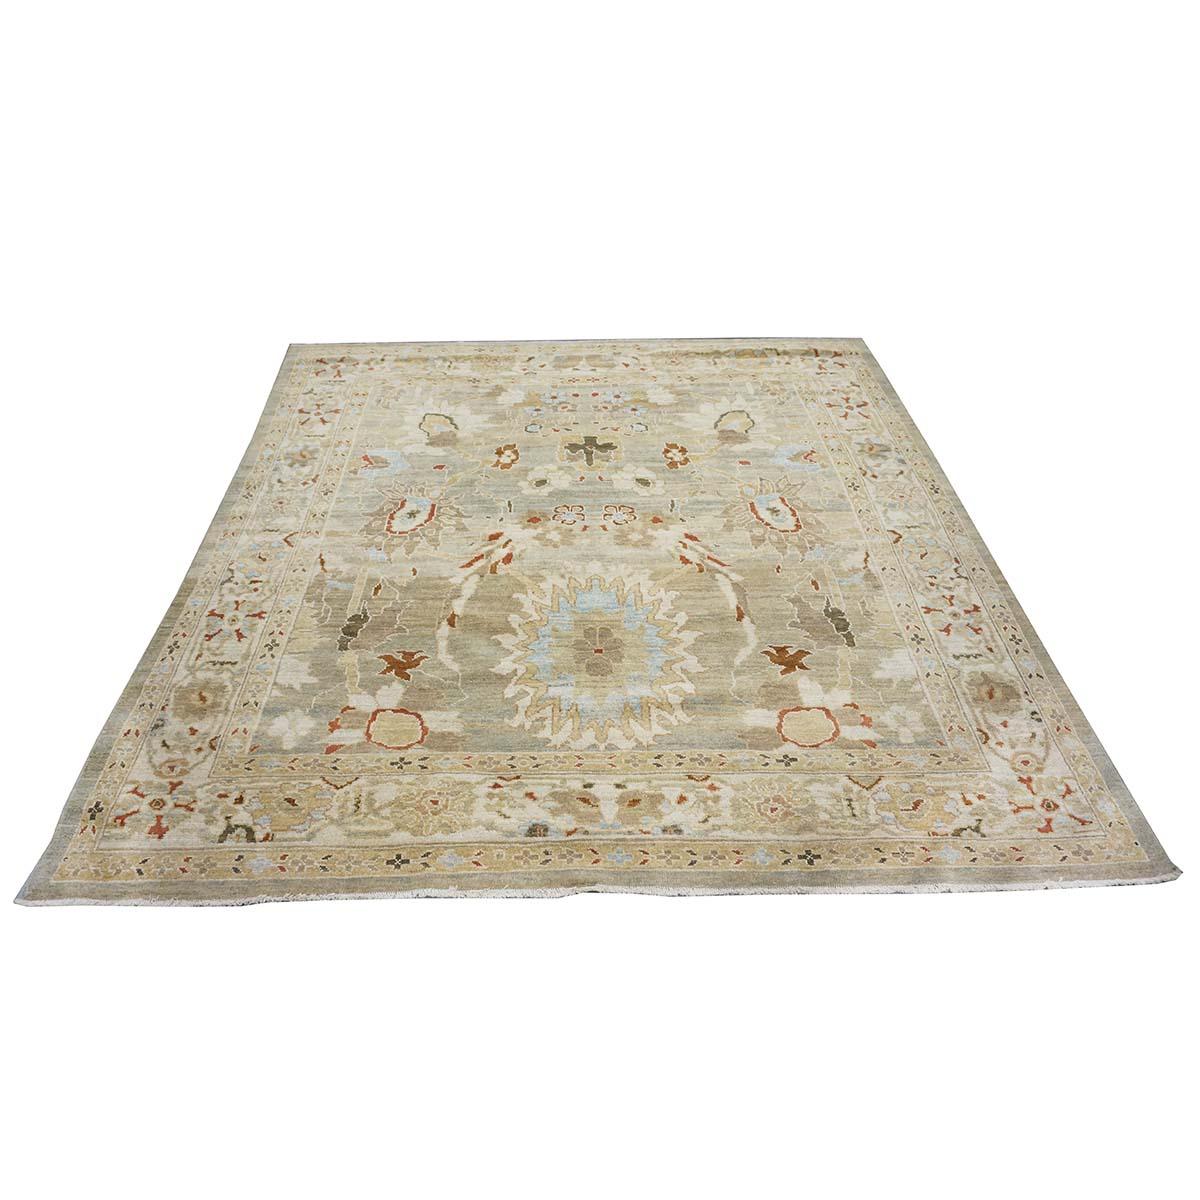 Ashly Fine Rugs presents an antique recreation of an original Persian Sultanabad 8x8 Square Tan, Blue, & Ivory Handmade Area Rug. Part of our own previous production, this antique recreation was thought of and created in-house and 100% handmade in